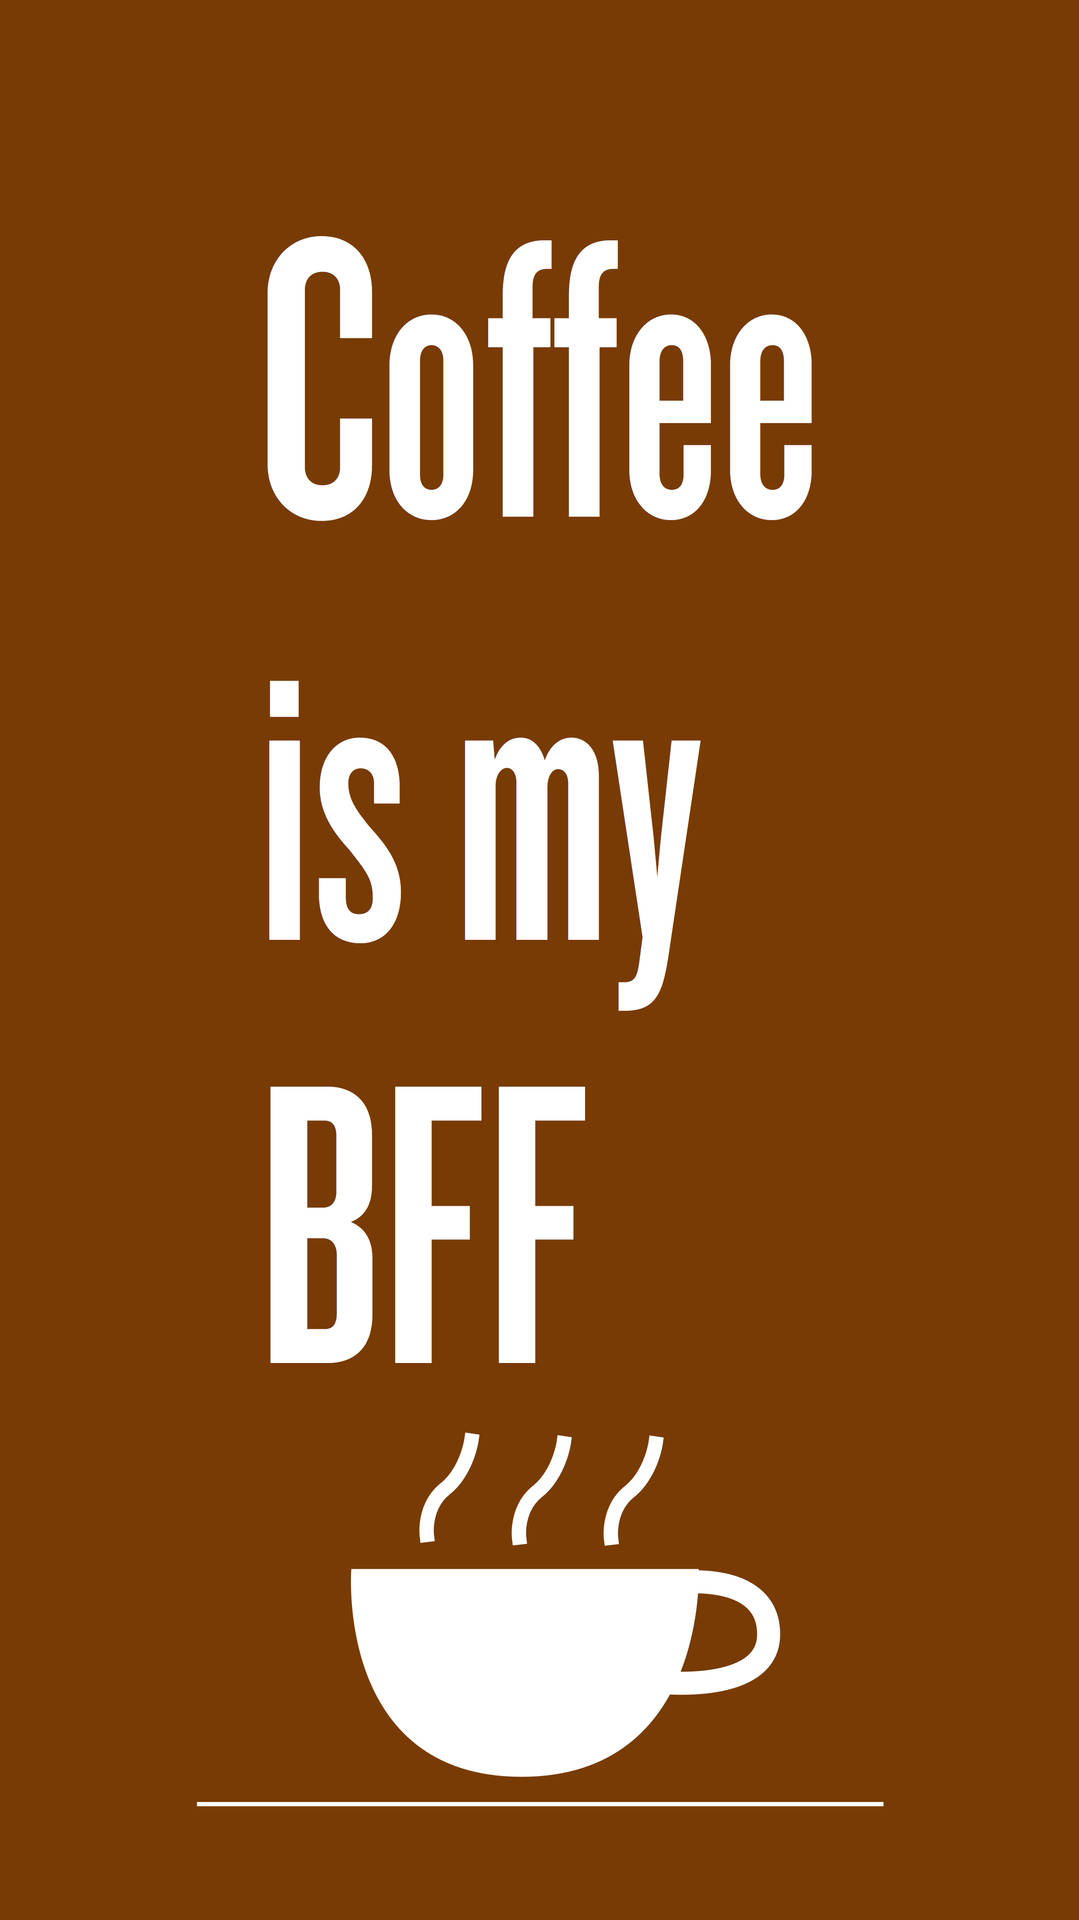 Indulge In The Deliciousness Of Coffee, It's My Bff! Wallpaper